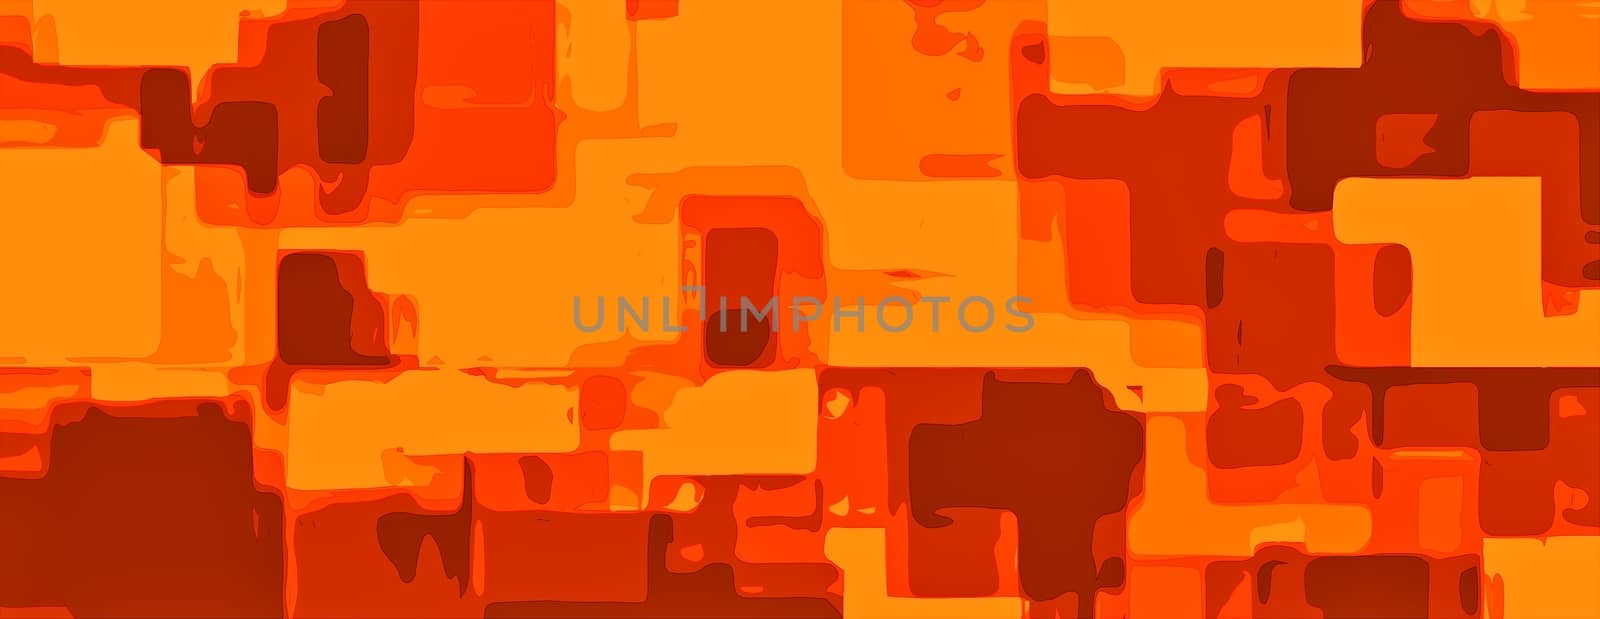 yellow red and brown painting abstract background